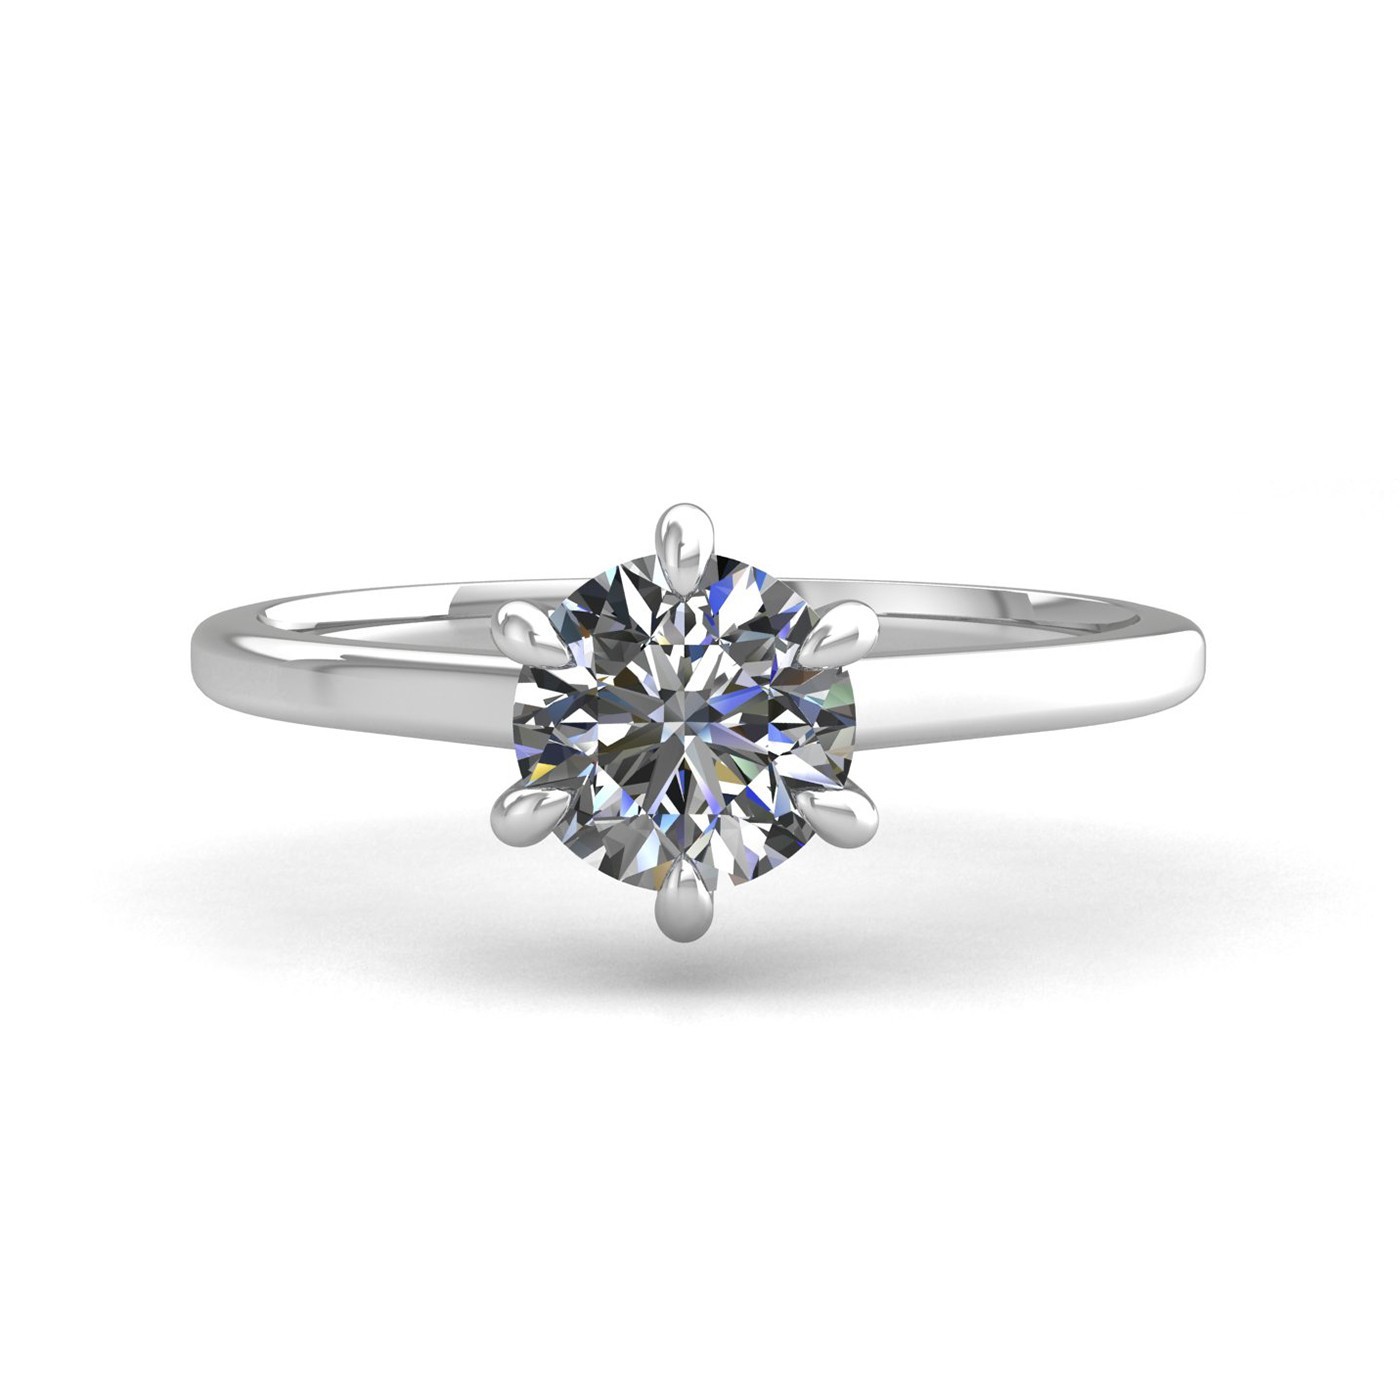 18k white gold 1,00 ct 6 prongs solitaire round cut diamond engagement ring with whisper thin band Photos & images